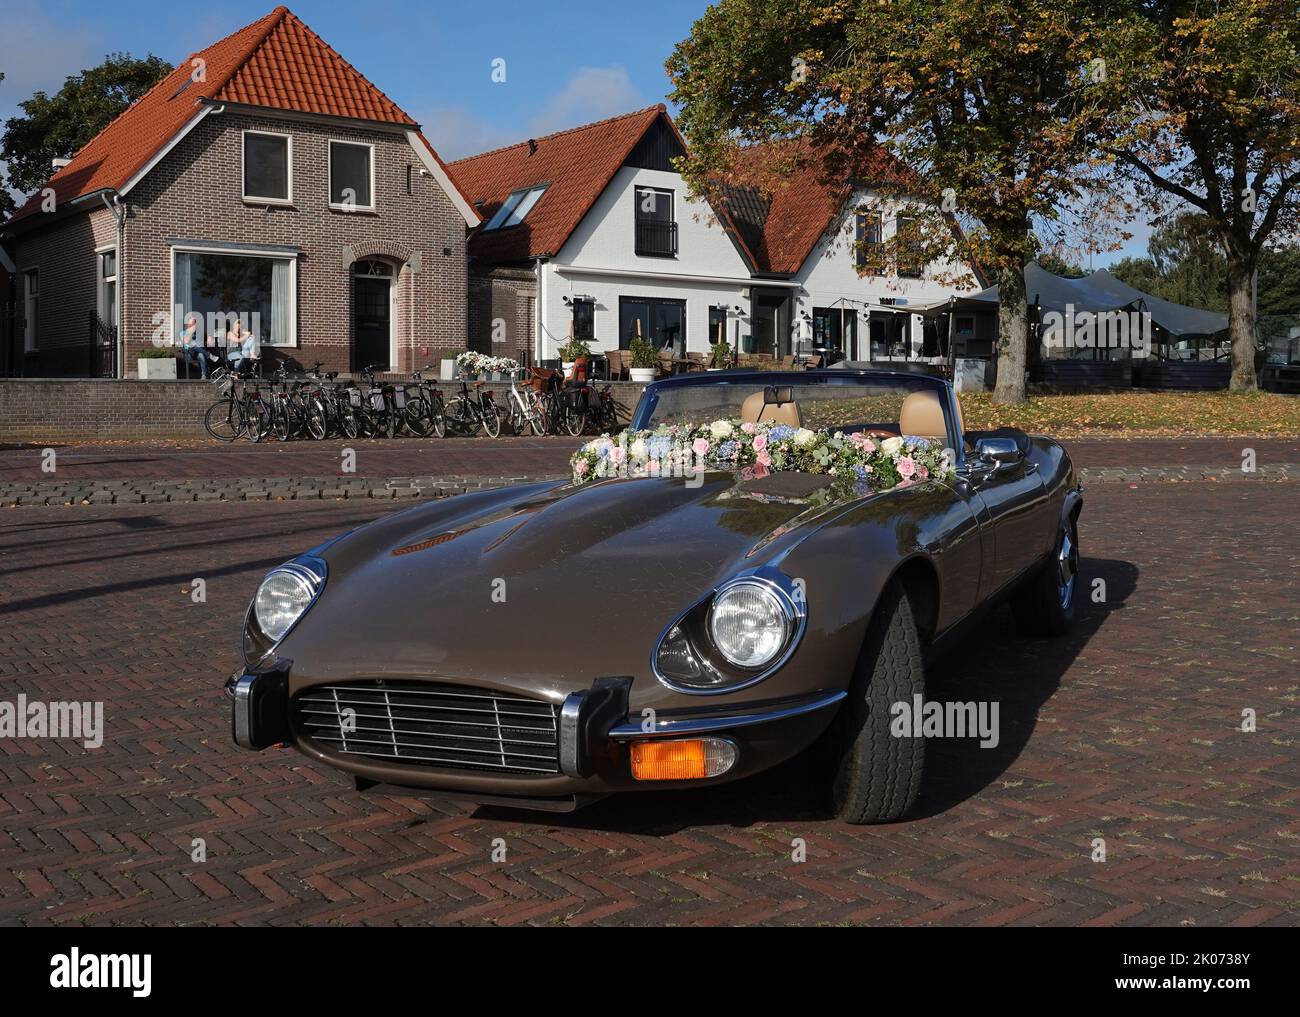 Elburg, Netherlands - Sept 9 2022 A very special rental car for weddings: a cabriolet Jaguar e-type. Some old Dutch houses in the background Stock Photo